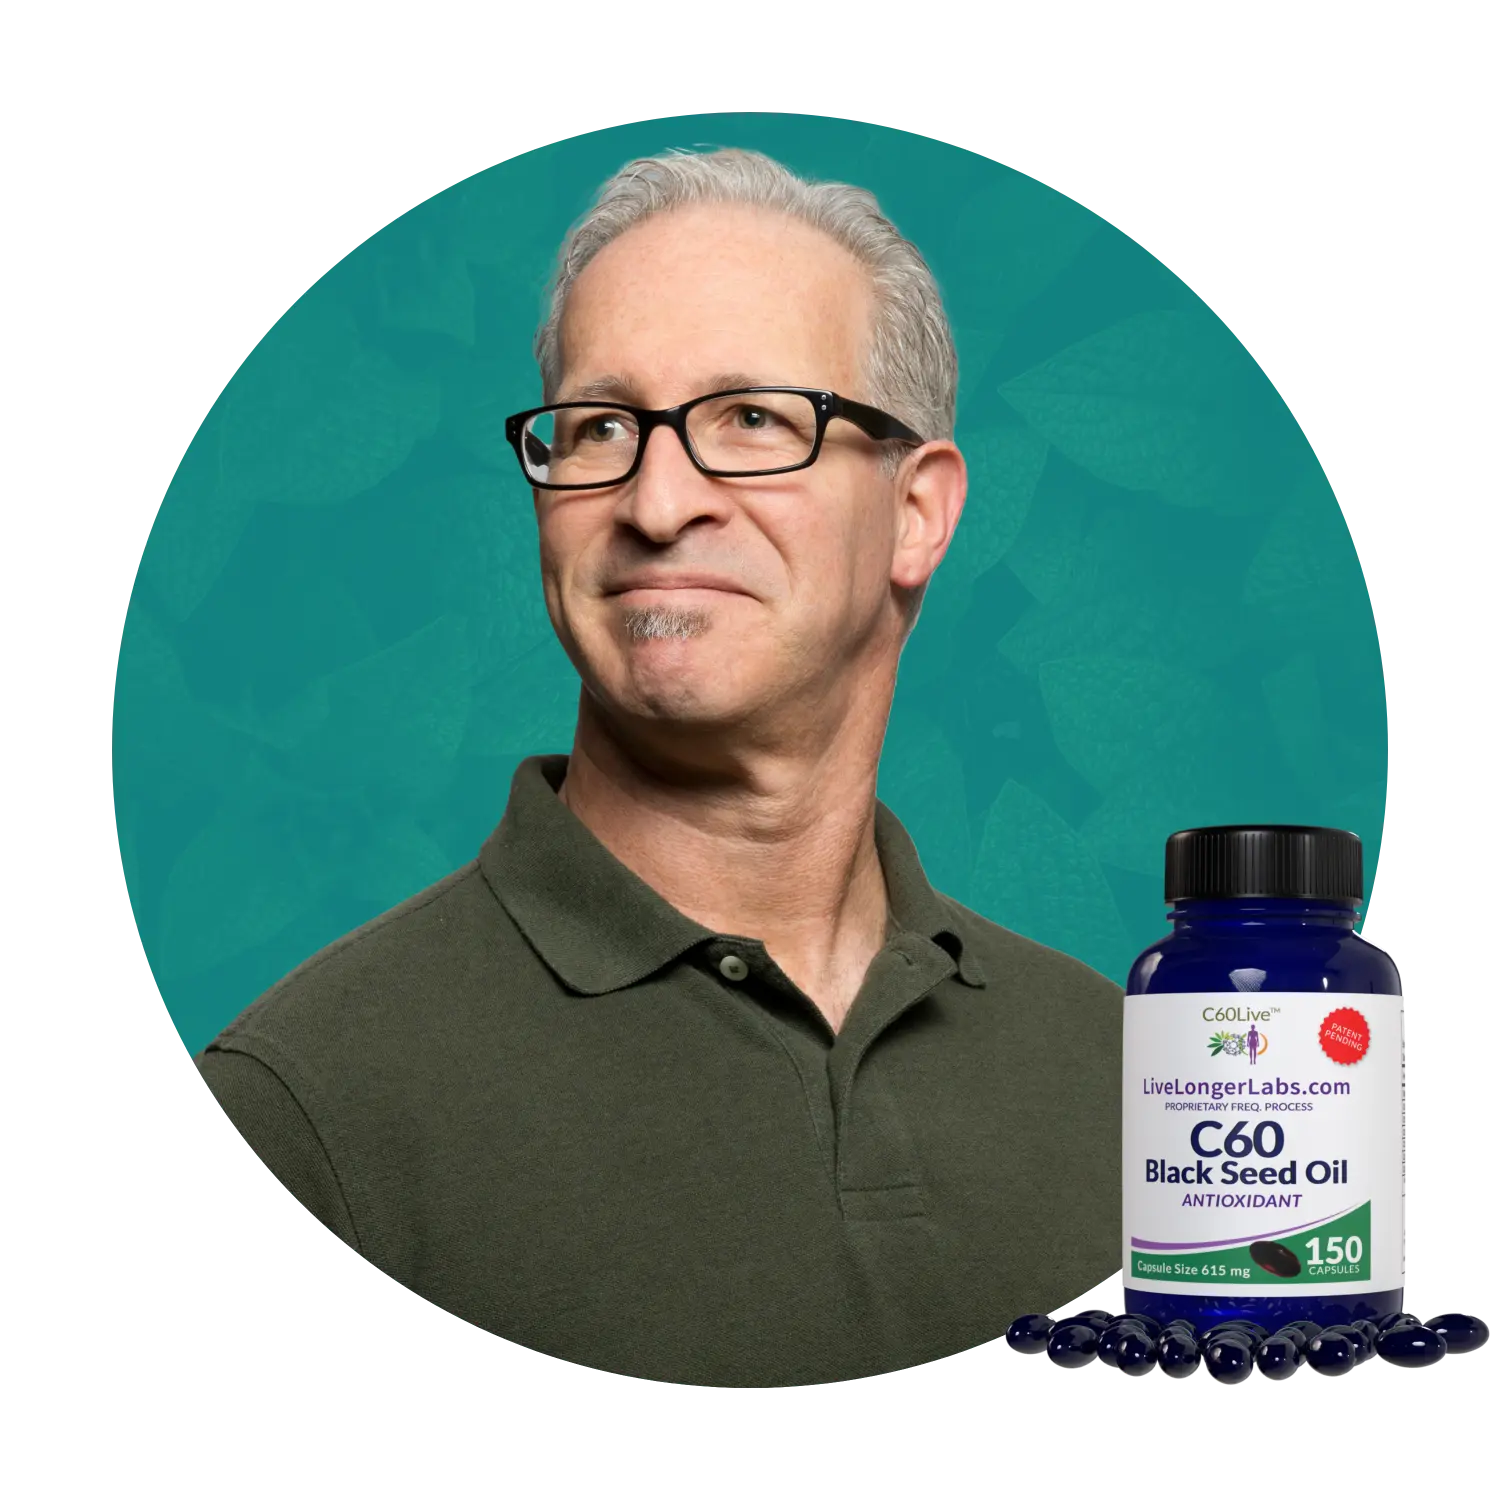 A senior man wearing eyeglasses is smiling in a side view angle with a C60 Black Seed Oil bottle in front of his image.